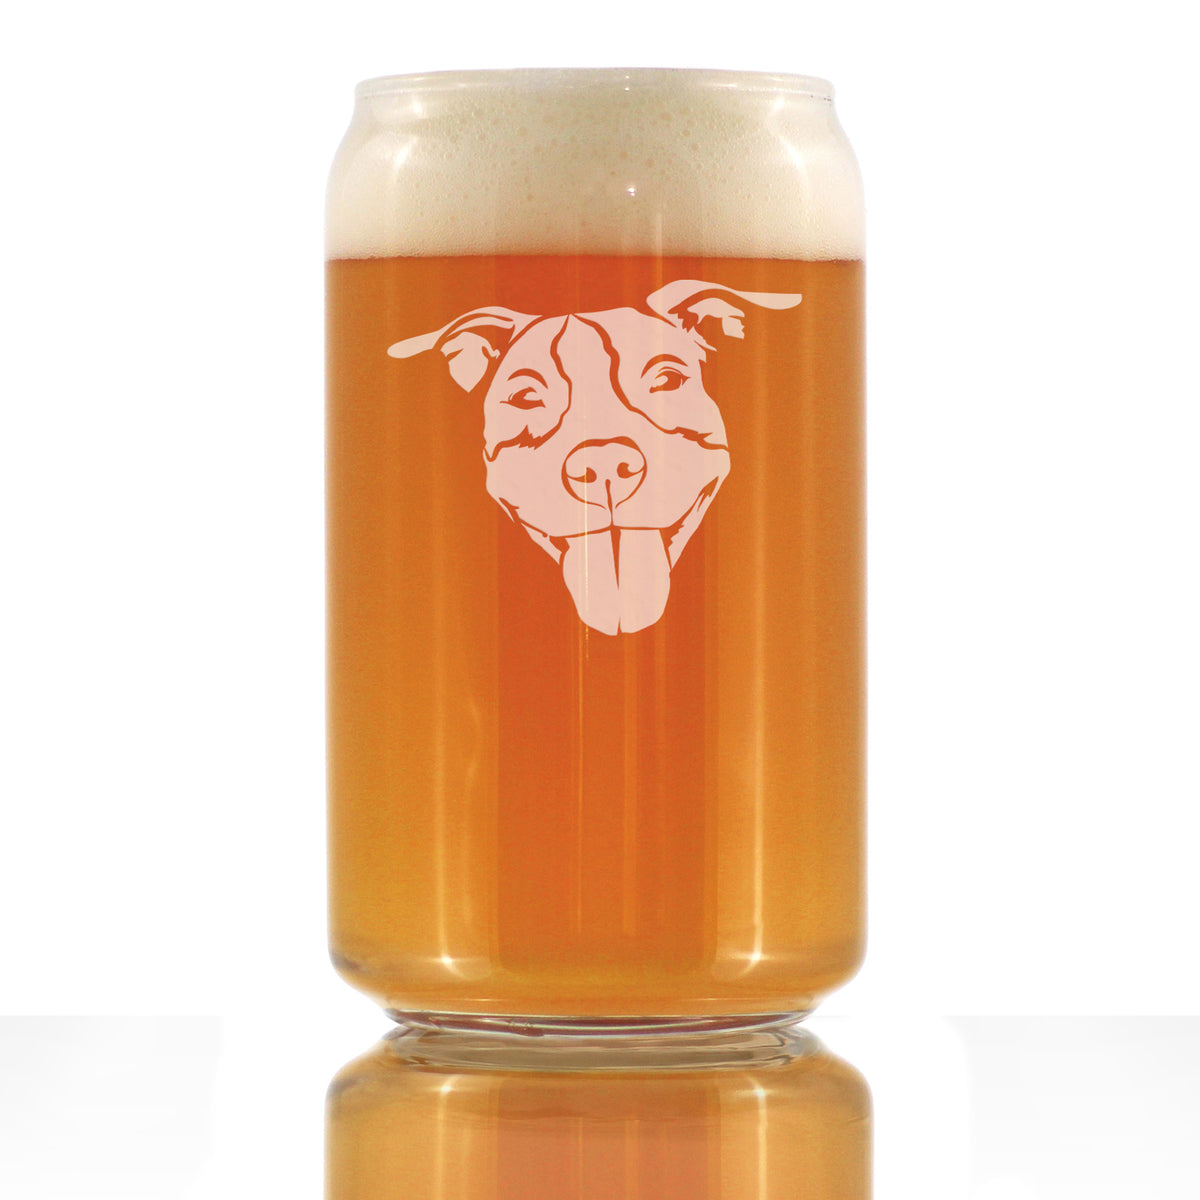 Happy Pitbull - Beer Can Pint Glass - Fun Unique Pitbull Themed Dog Gifts and Party Decor for Women and Men - 16 oz